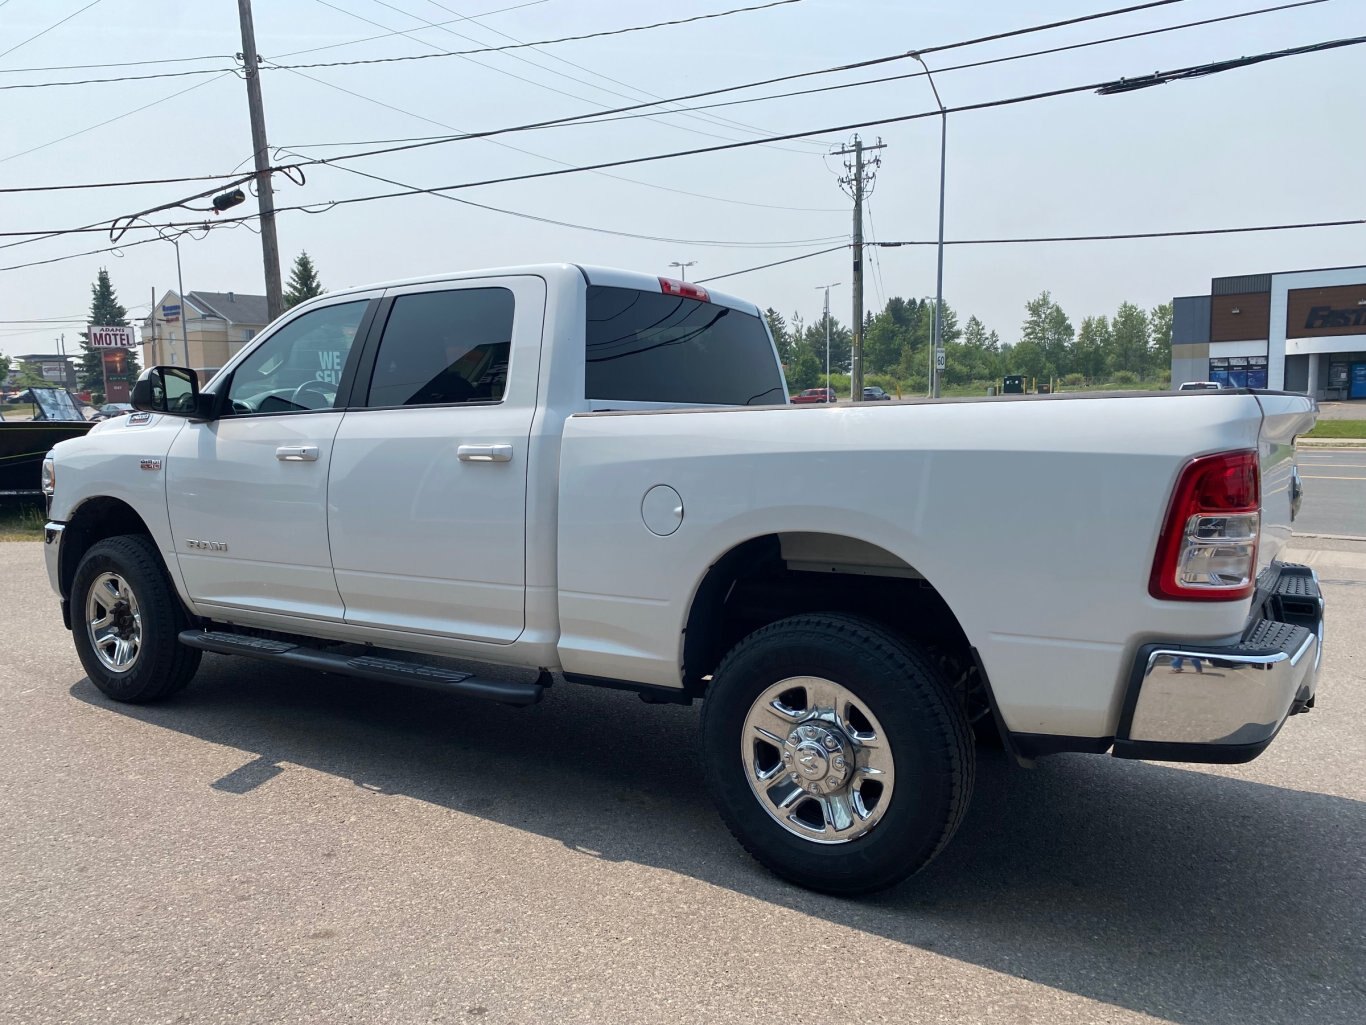 2020 DODGE RAM 2500 BIG HORN 4X4 CREW CAB WITH REAR VIEW CAMERA!! ( PREVIOUS RENTAL )